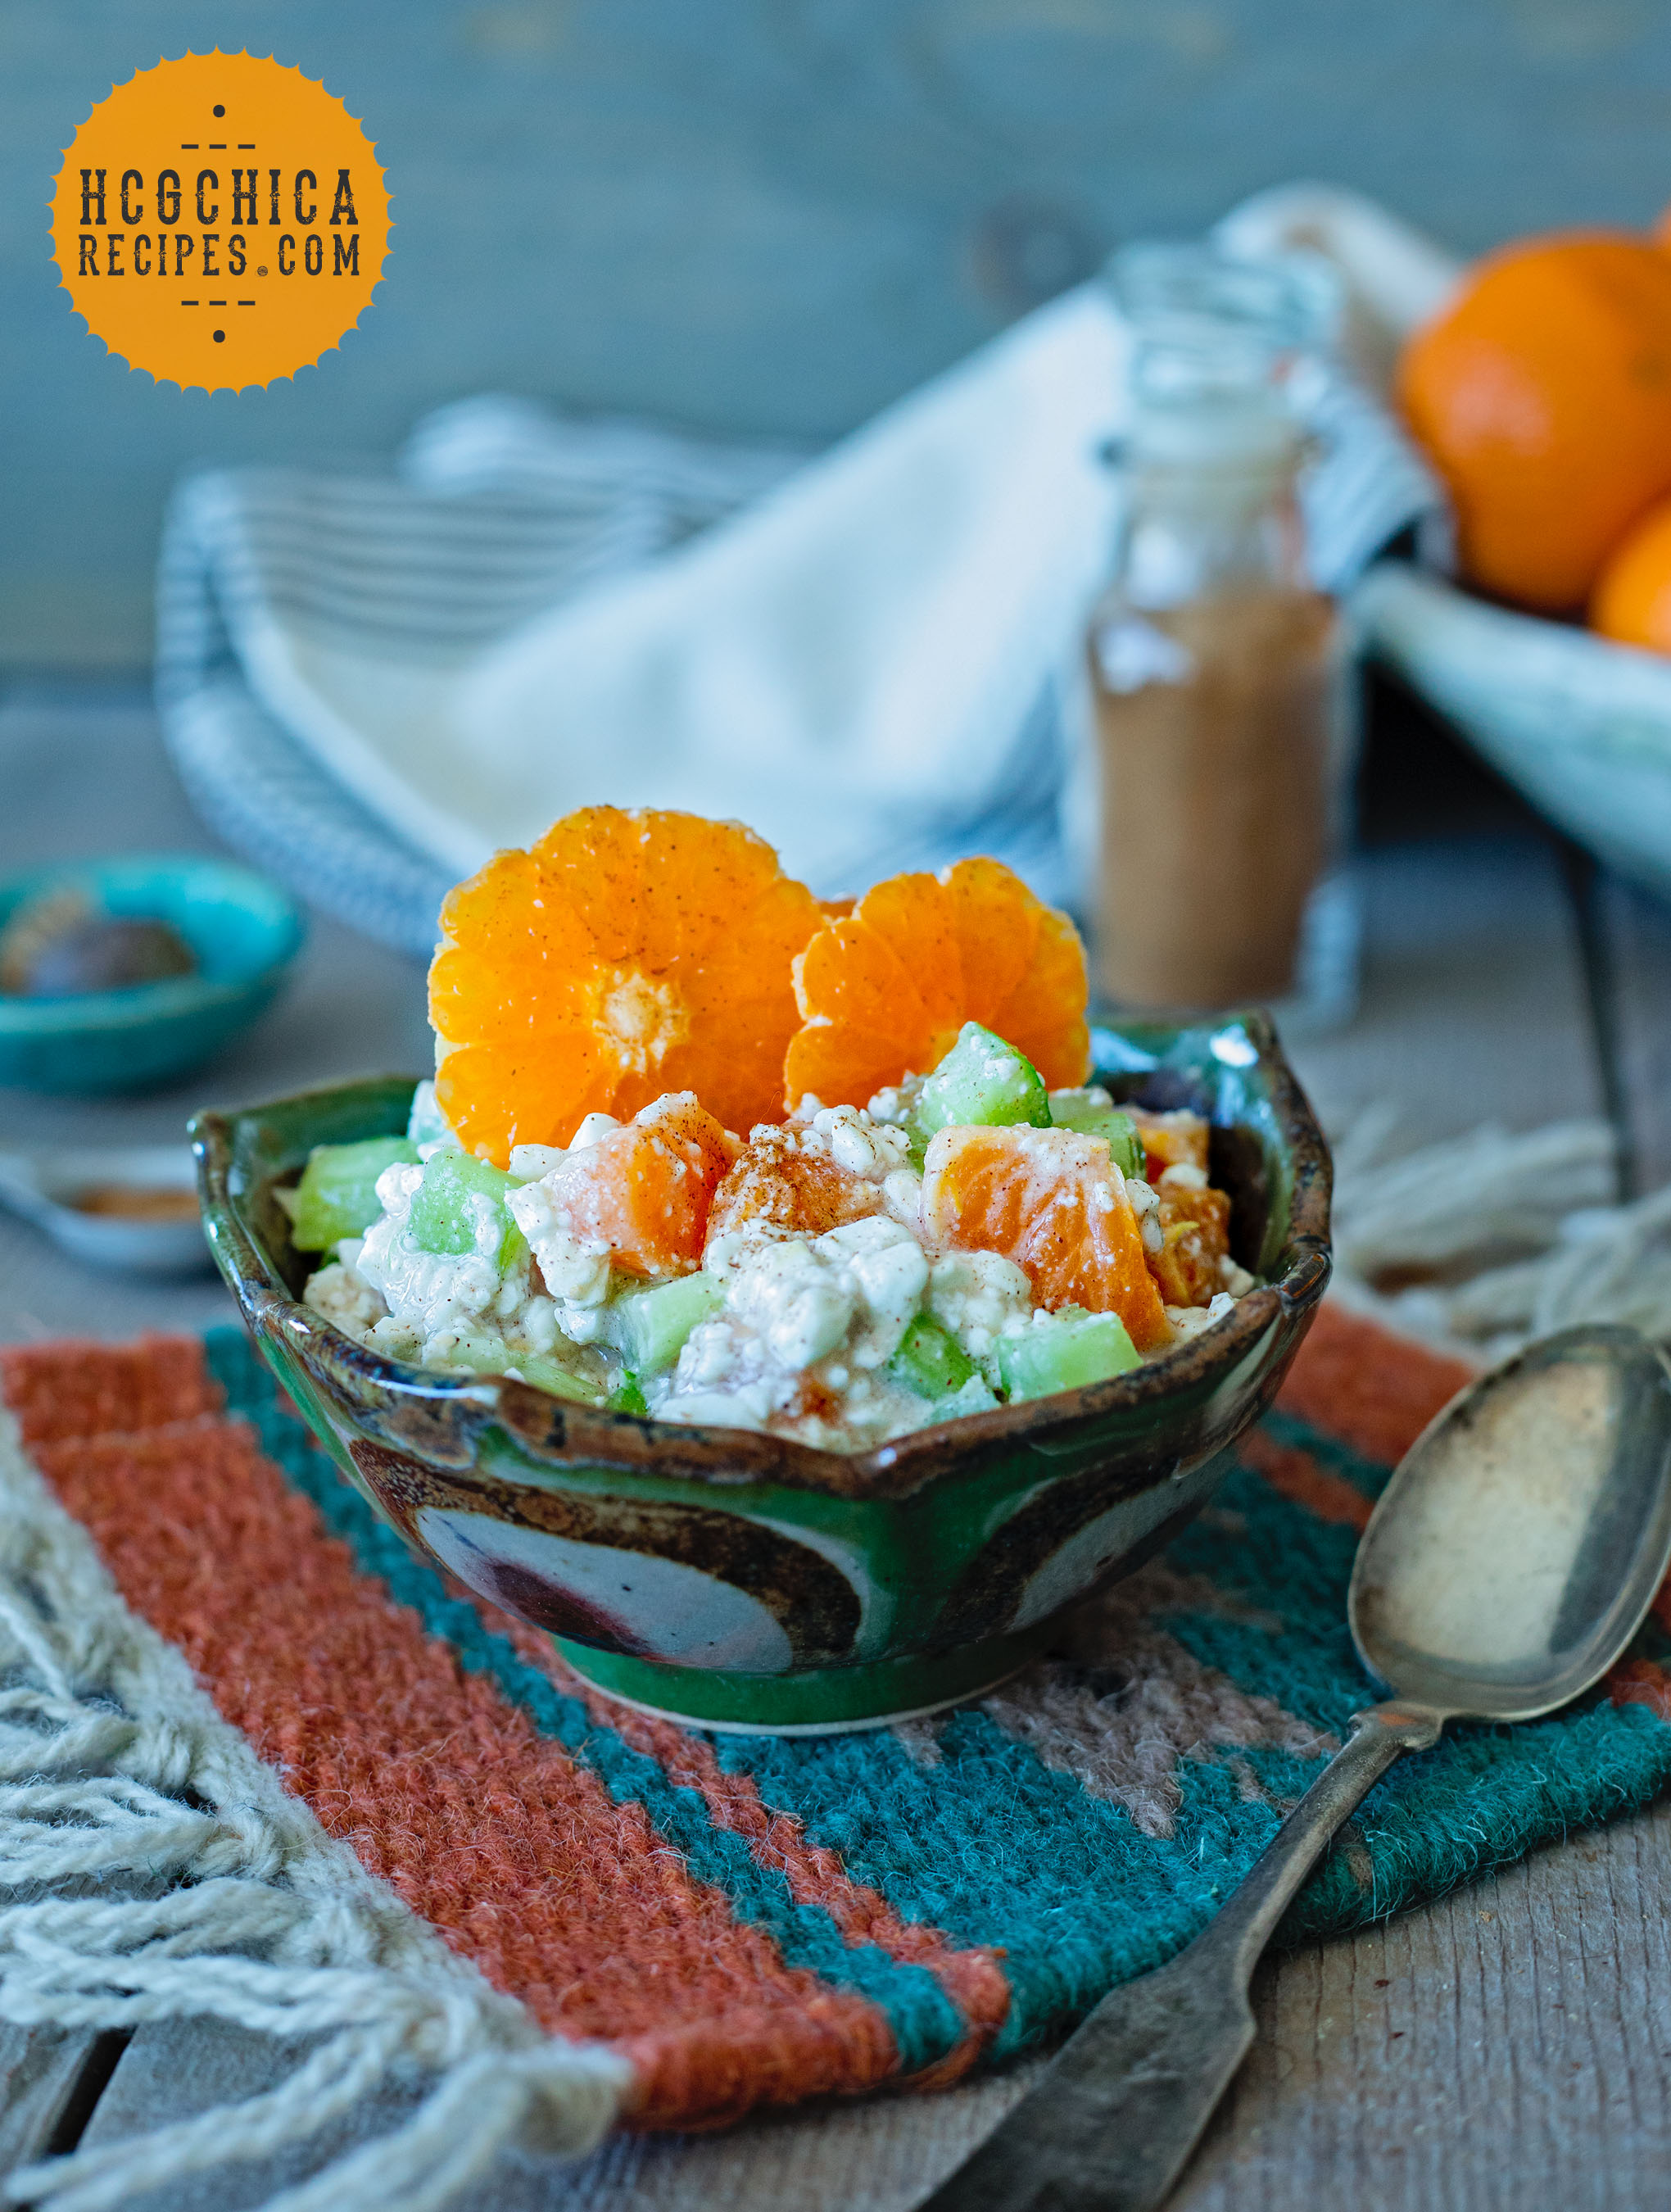 P2 Hcg Diet Recipe Sweet Crunchy Salad With Cottage Cheese